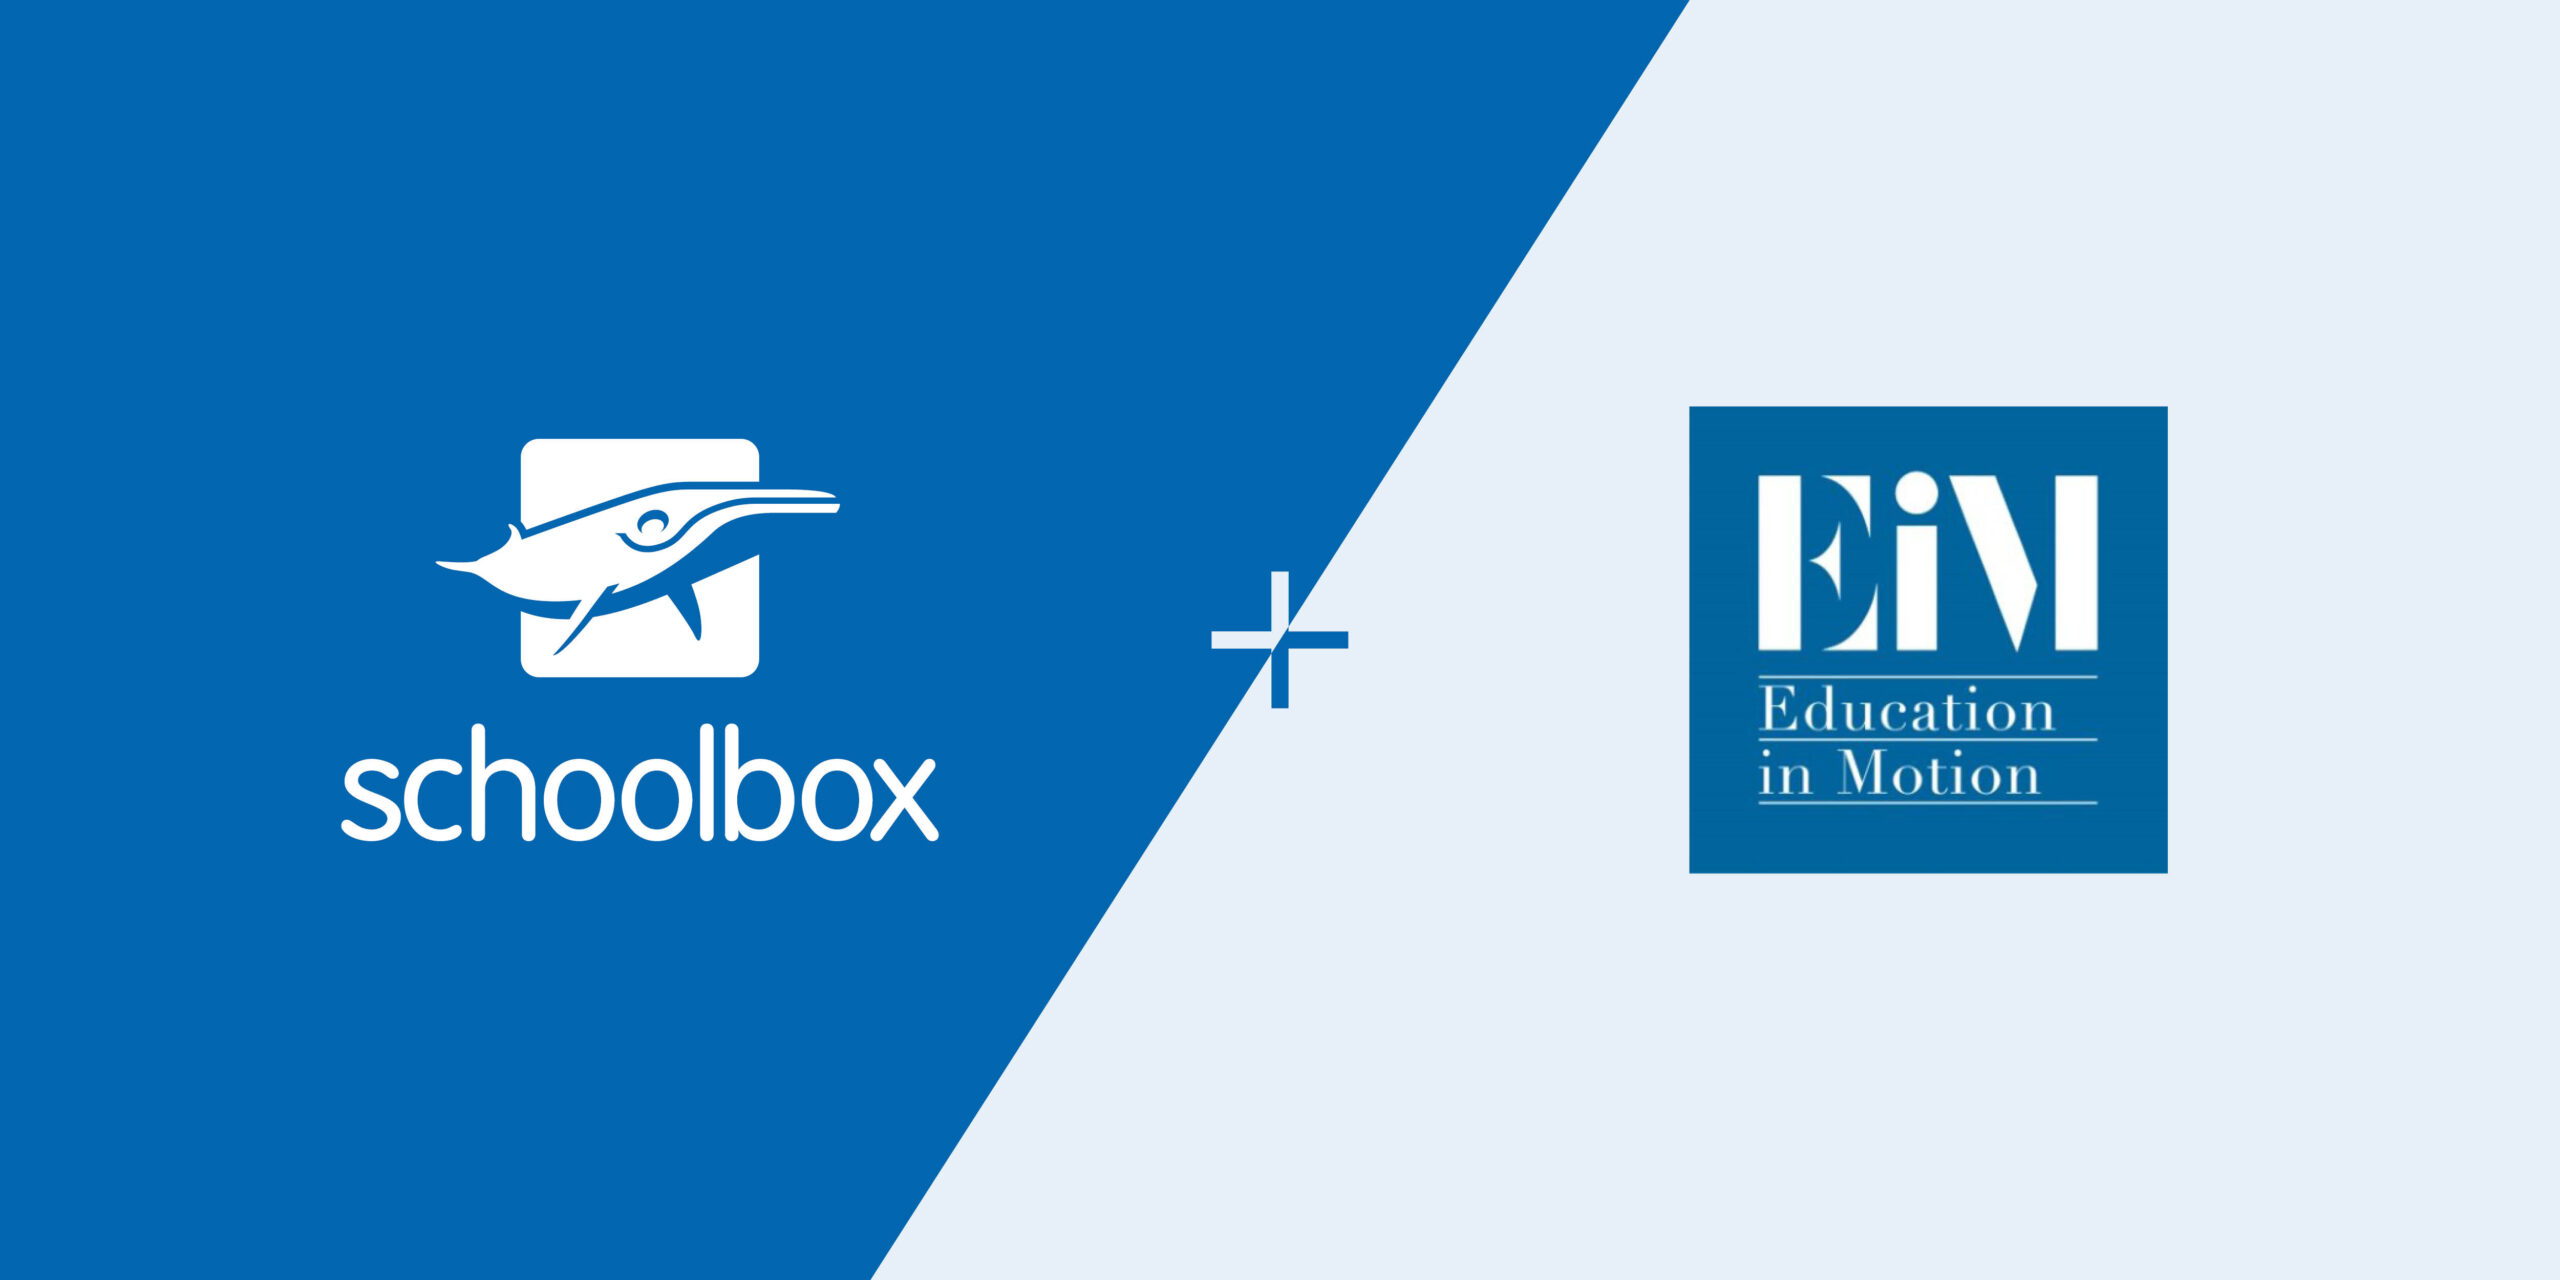 Schoolbox and Education in Motion group enter into strategic partnership